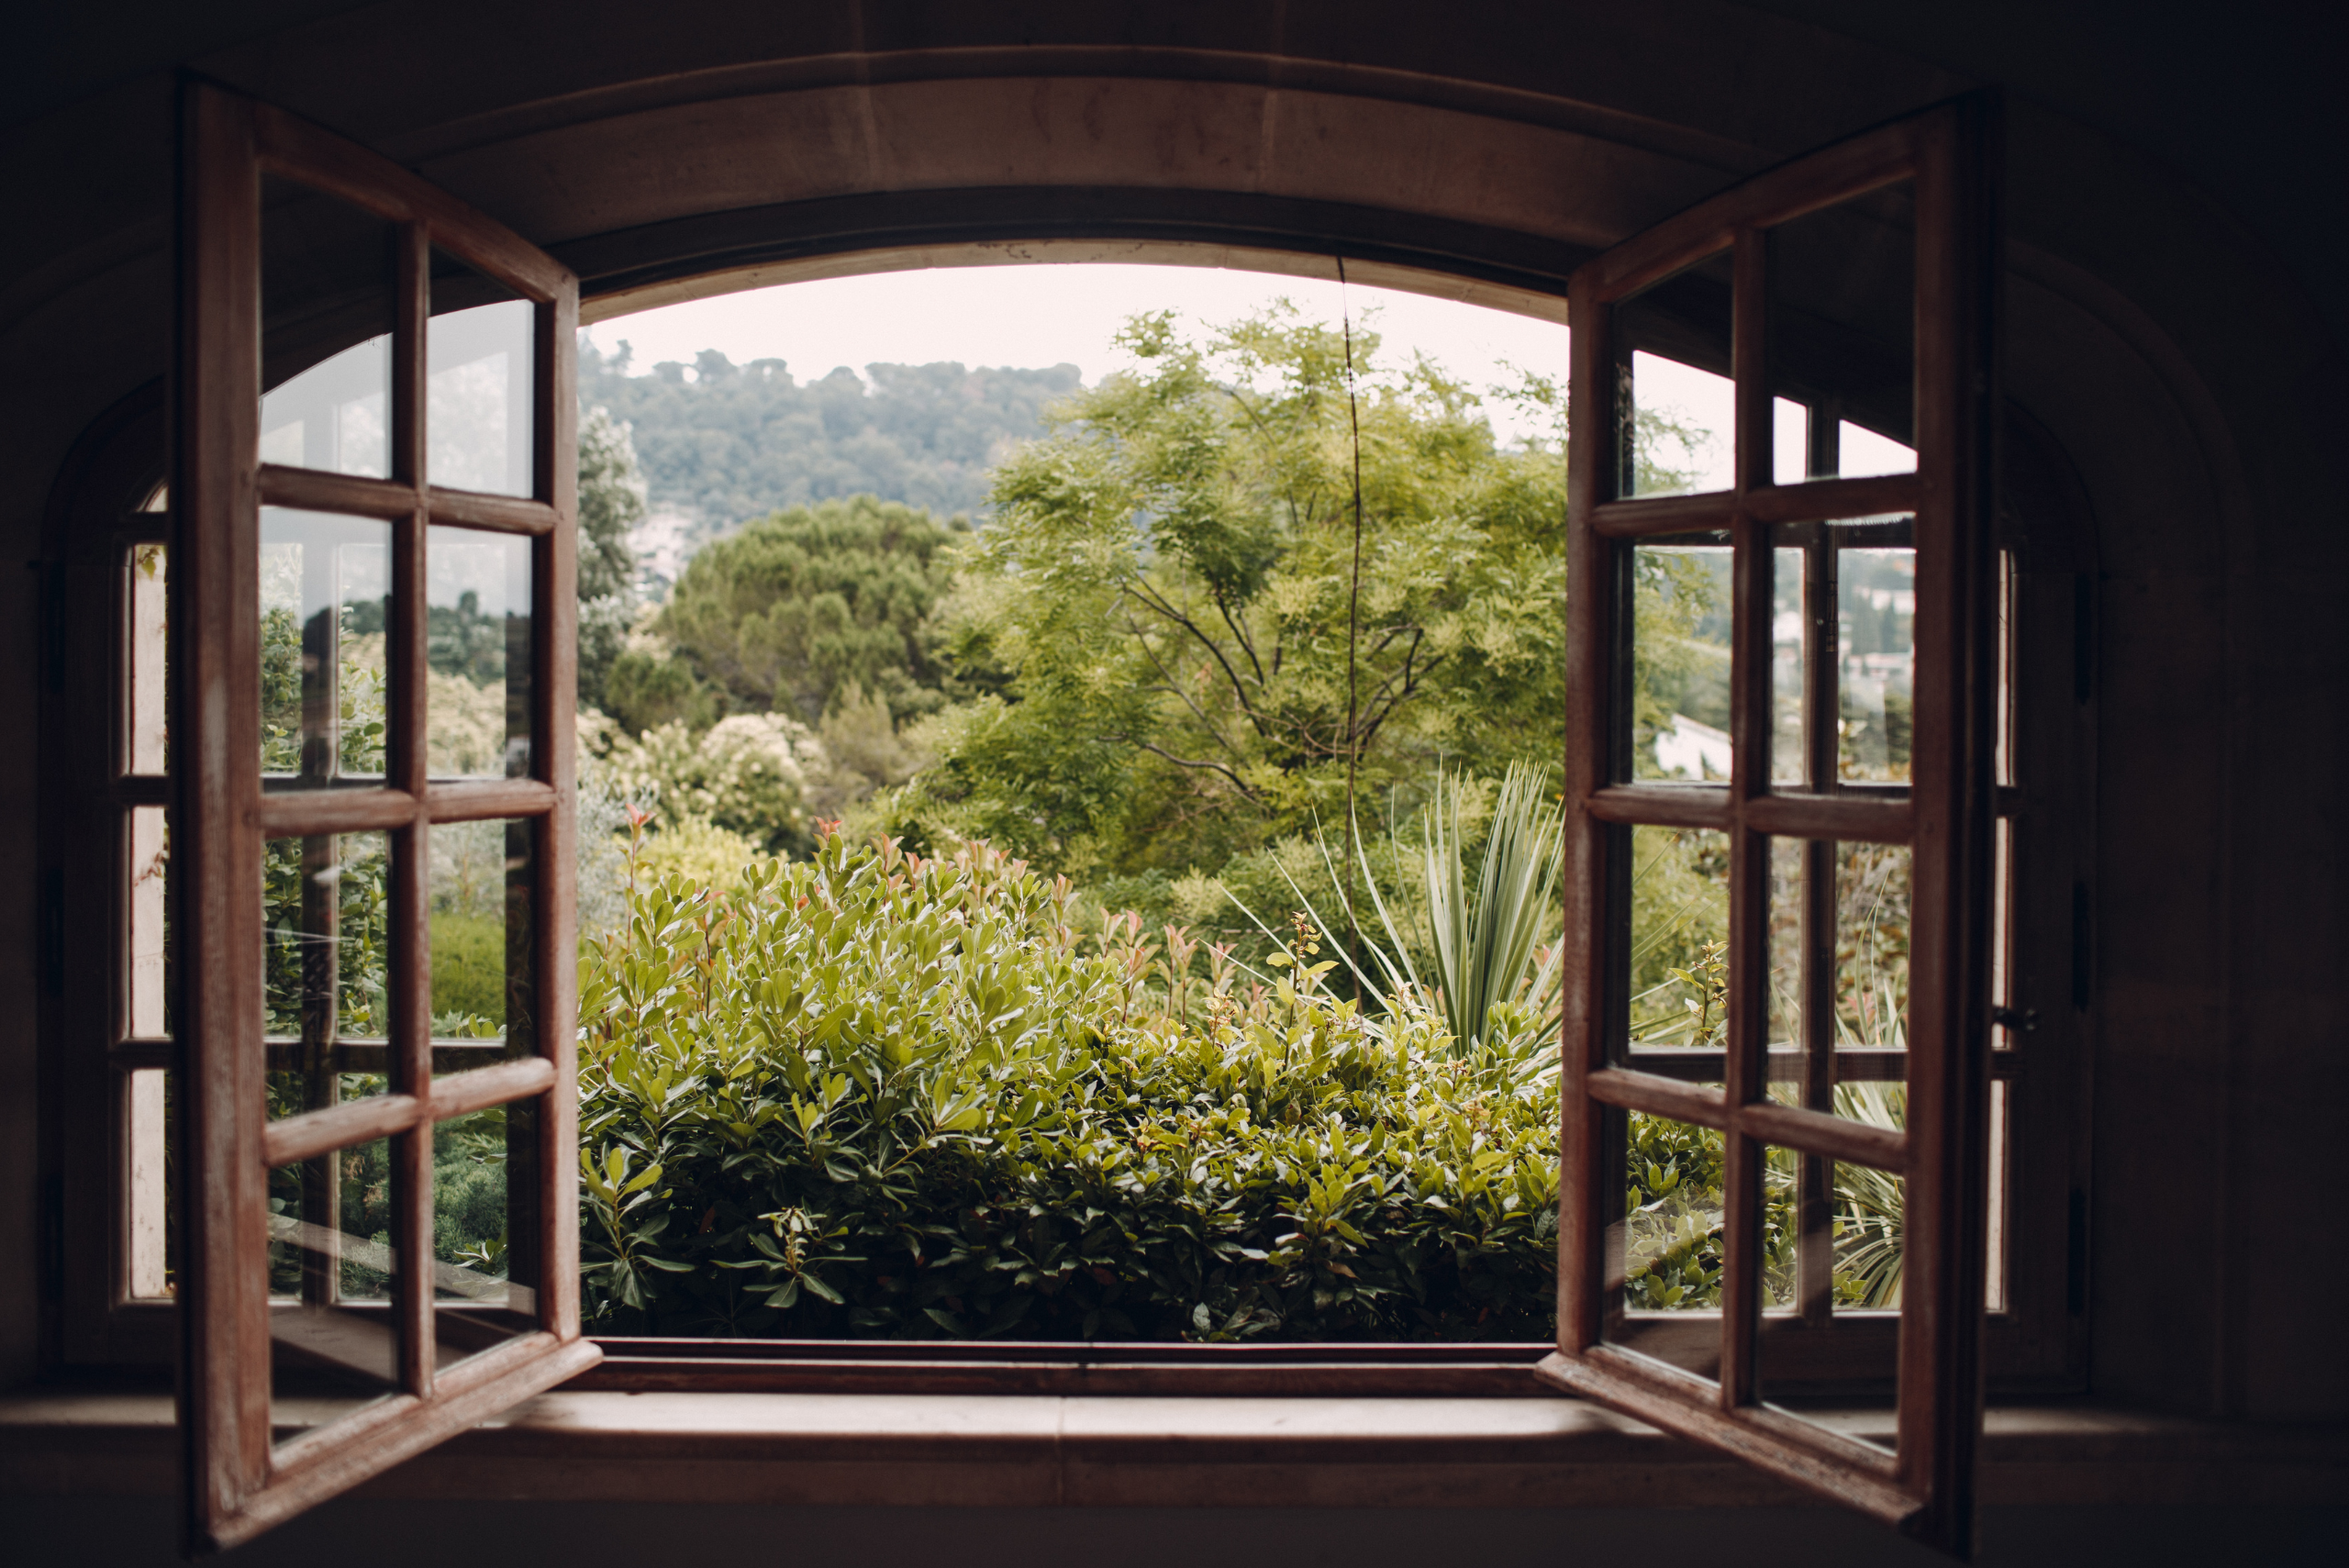 Open windows with trees outside.